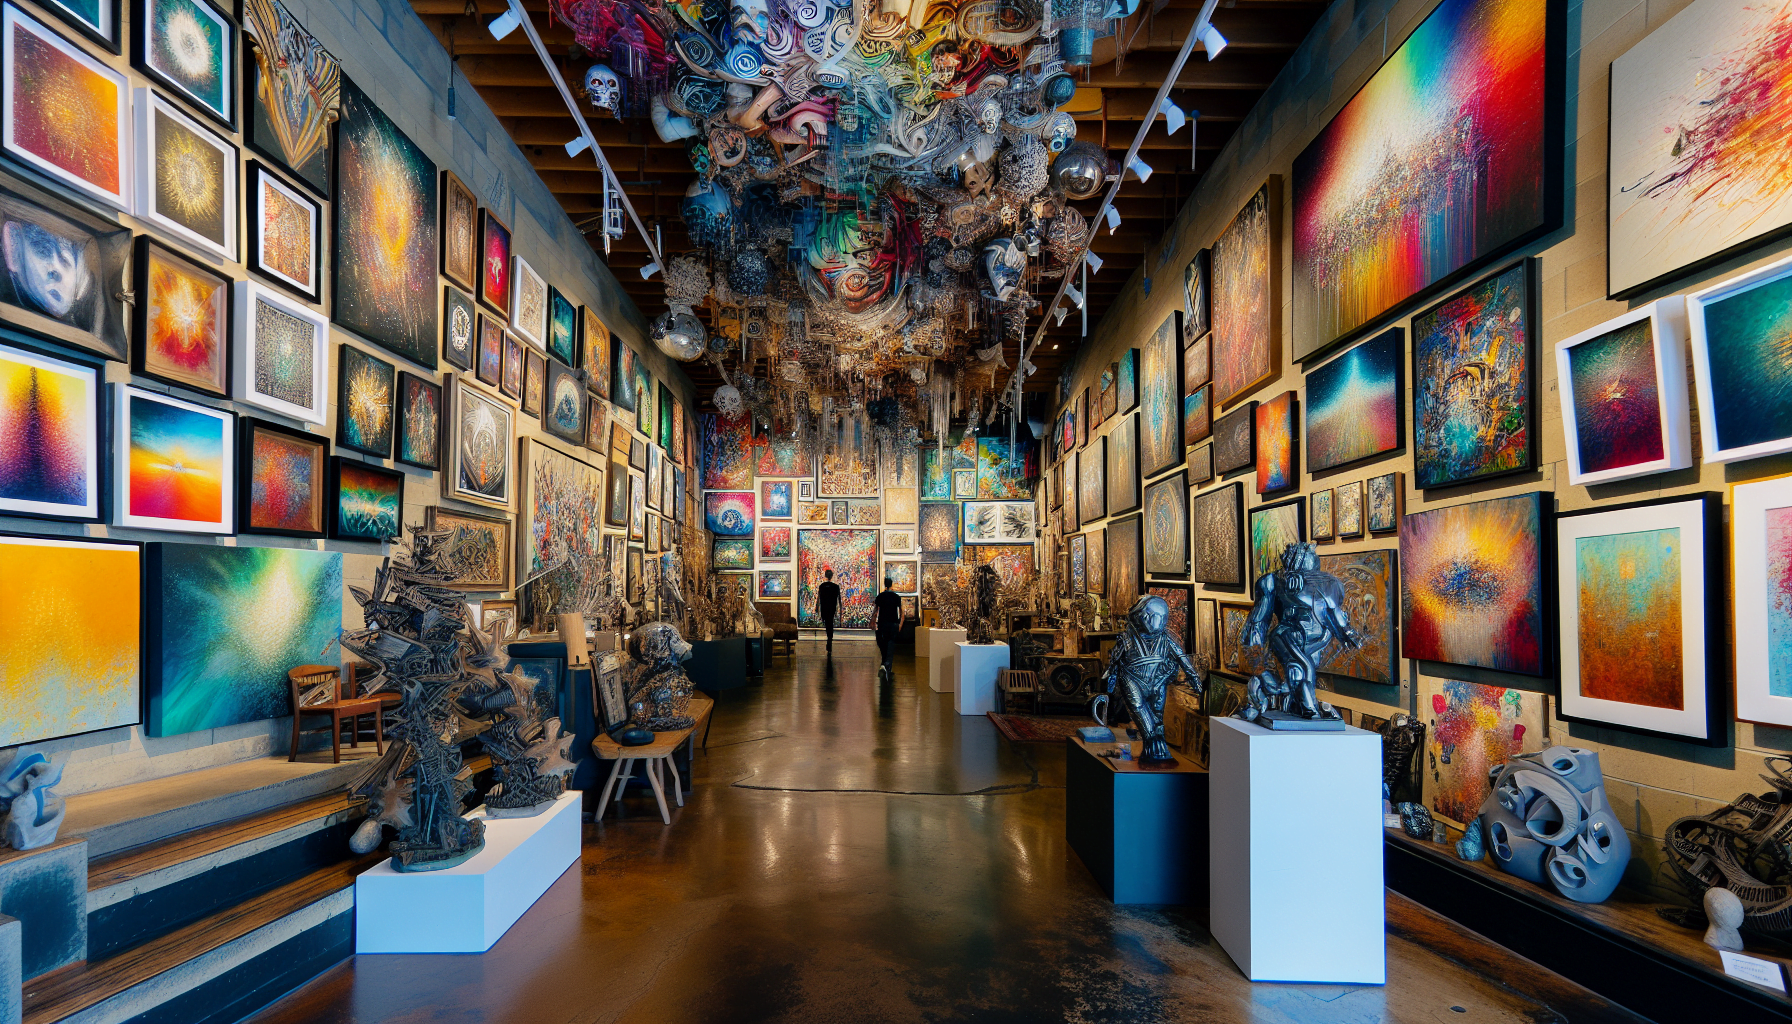 Vibrant art gallery interior with diverse artworks on display